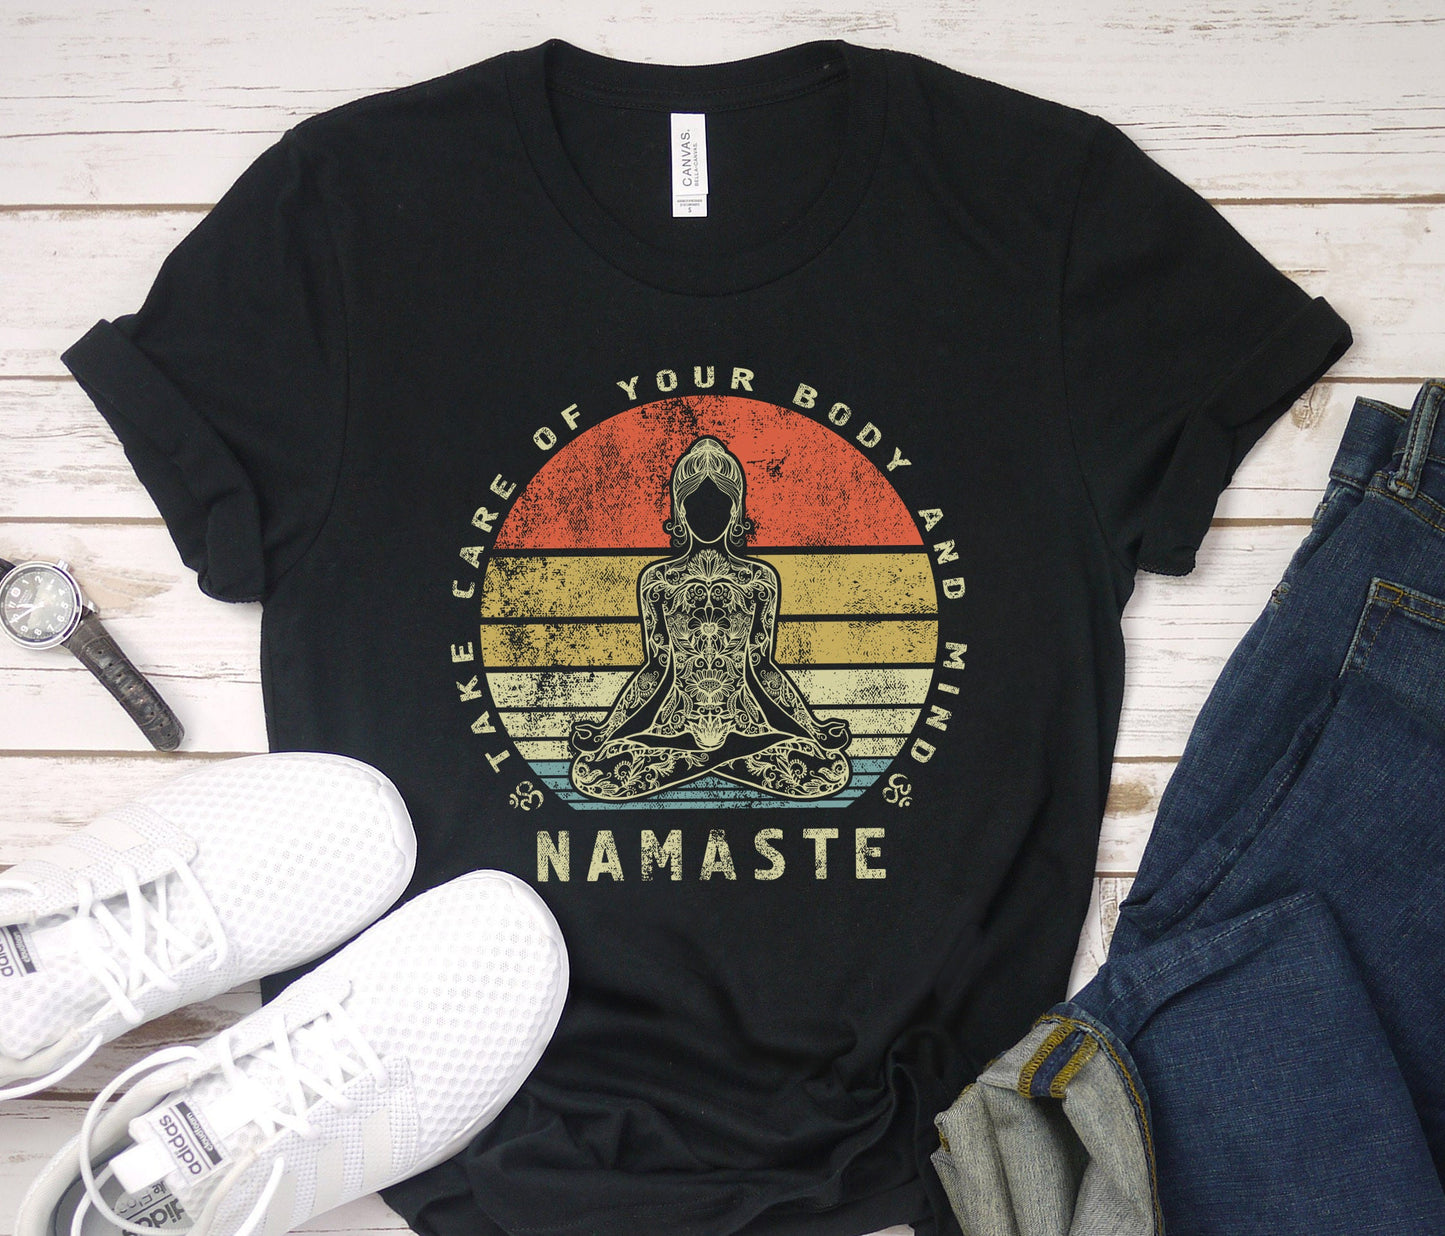 Take Care of Your Body and Mind - Yoga meditation shirt for women or men, Namaste relax t-shirt